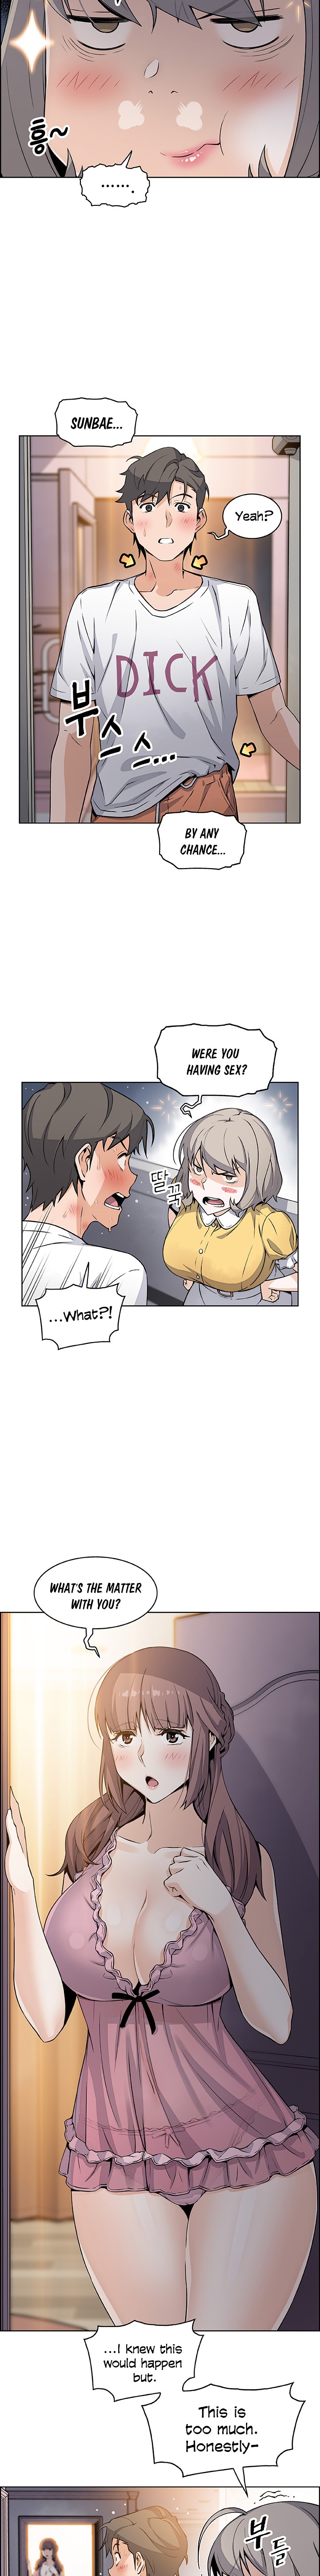 Housekeeper Manhwa - Chapter 35 Page 4